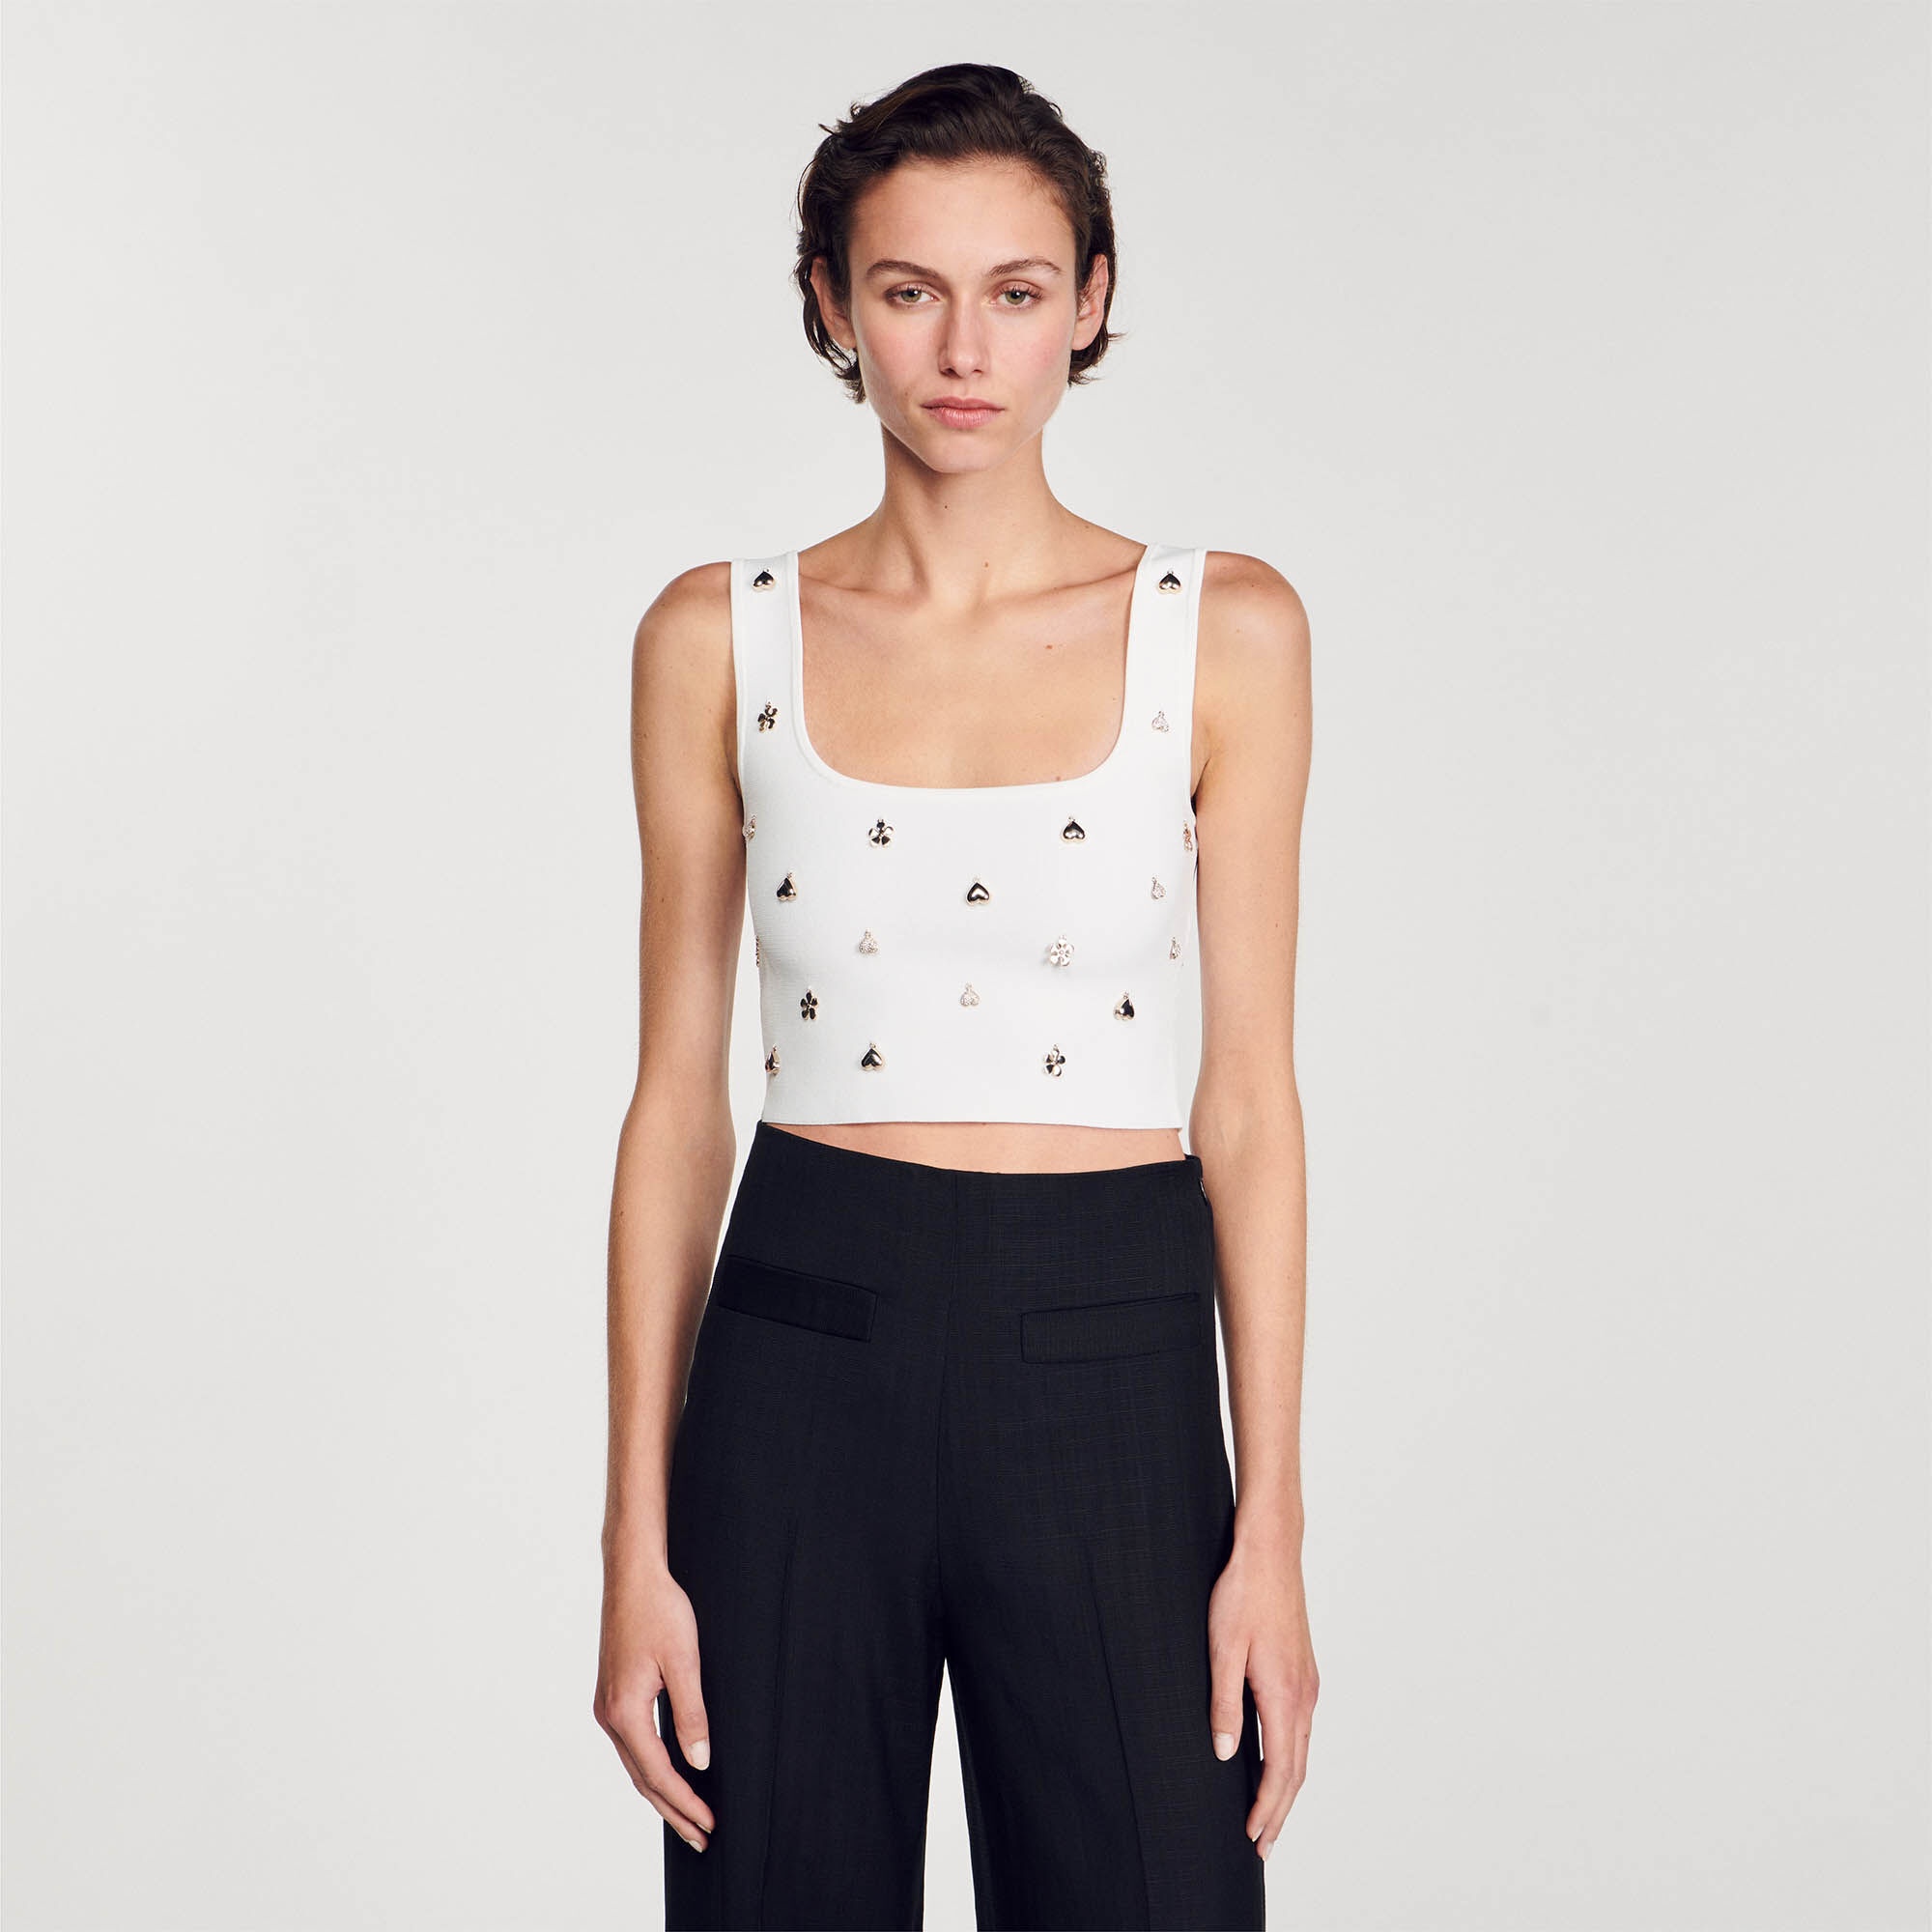 KNIT CROP TOP WITH CHARMS - 5